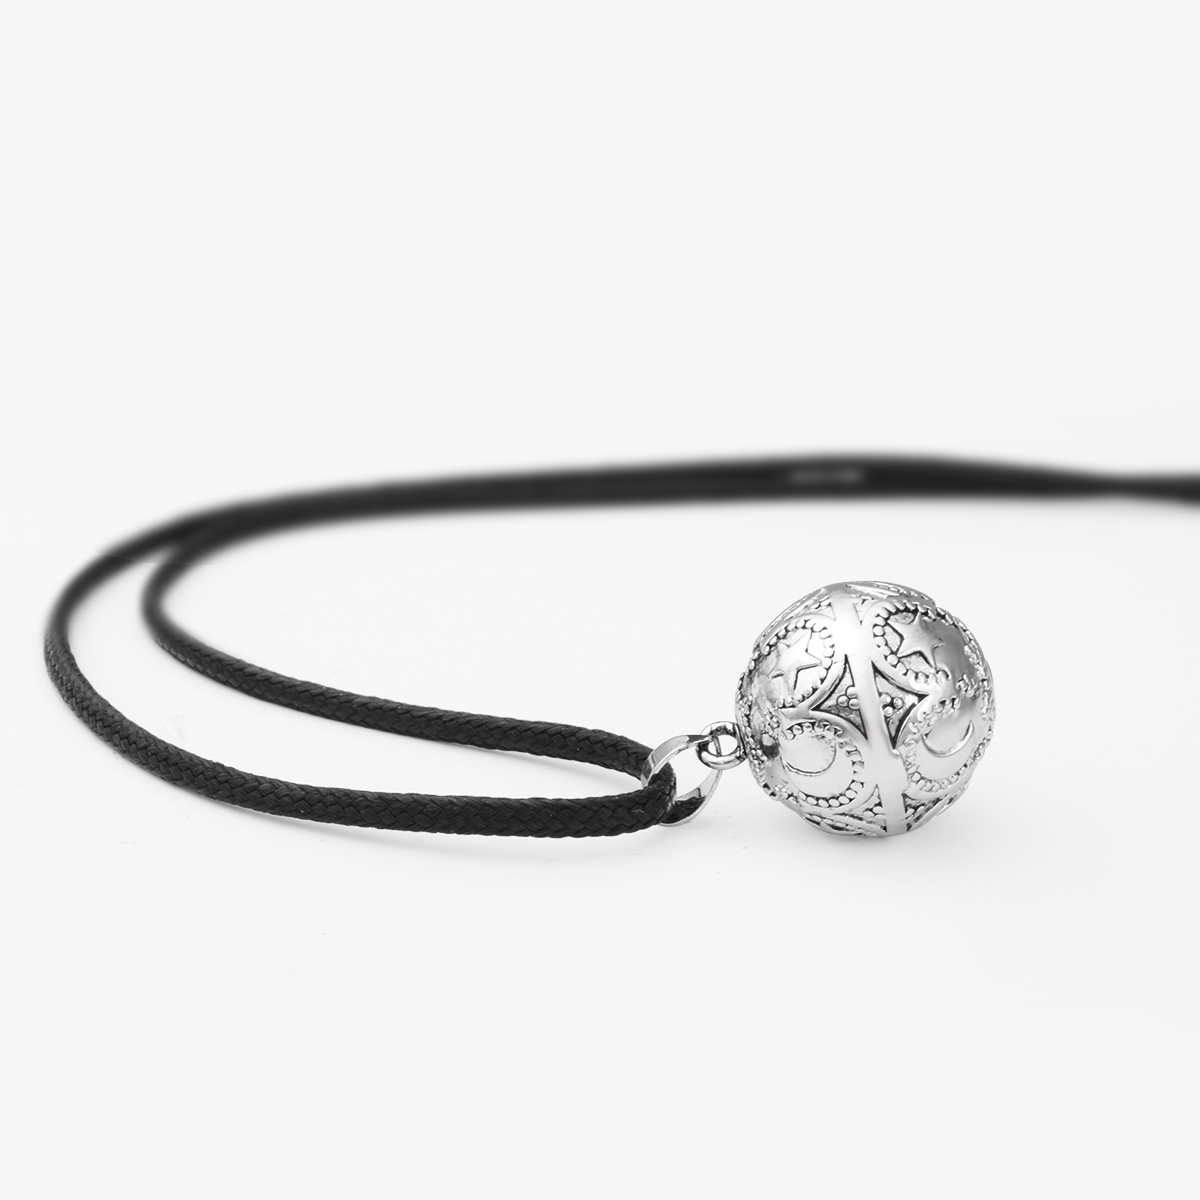 Expectant Mother's Delight: Bola Pregnancy Chime Necklace by Merryshine Jewelry